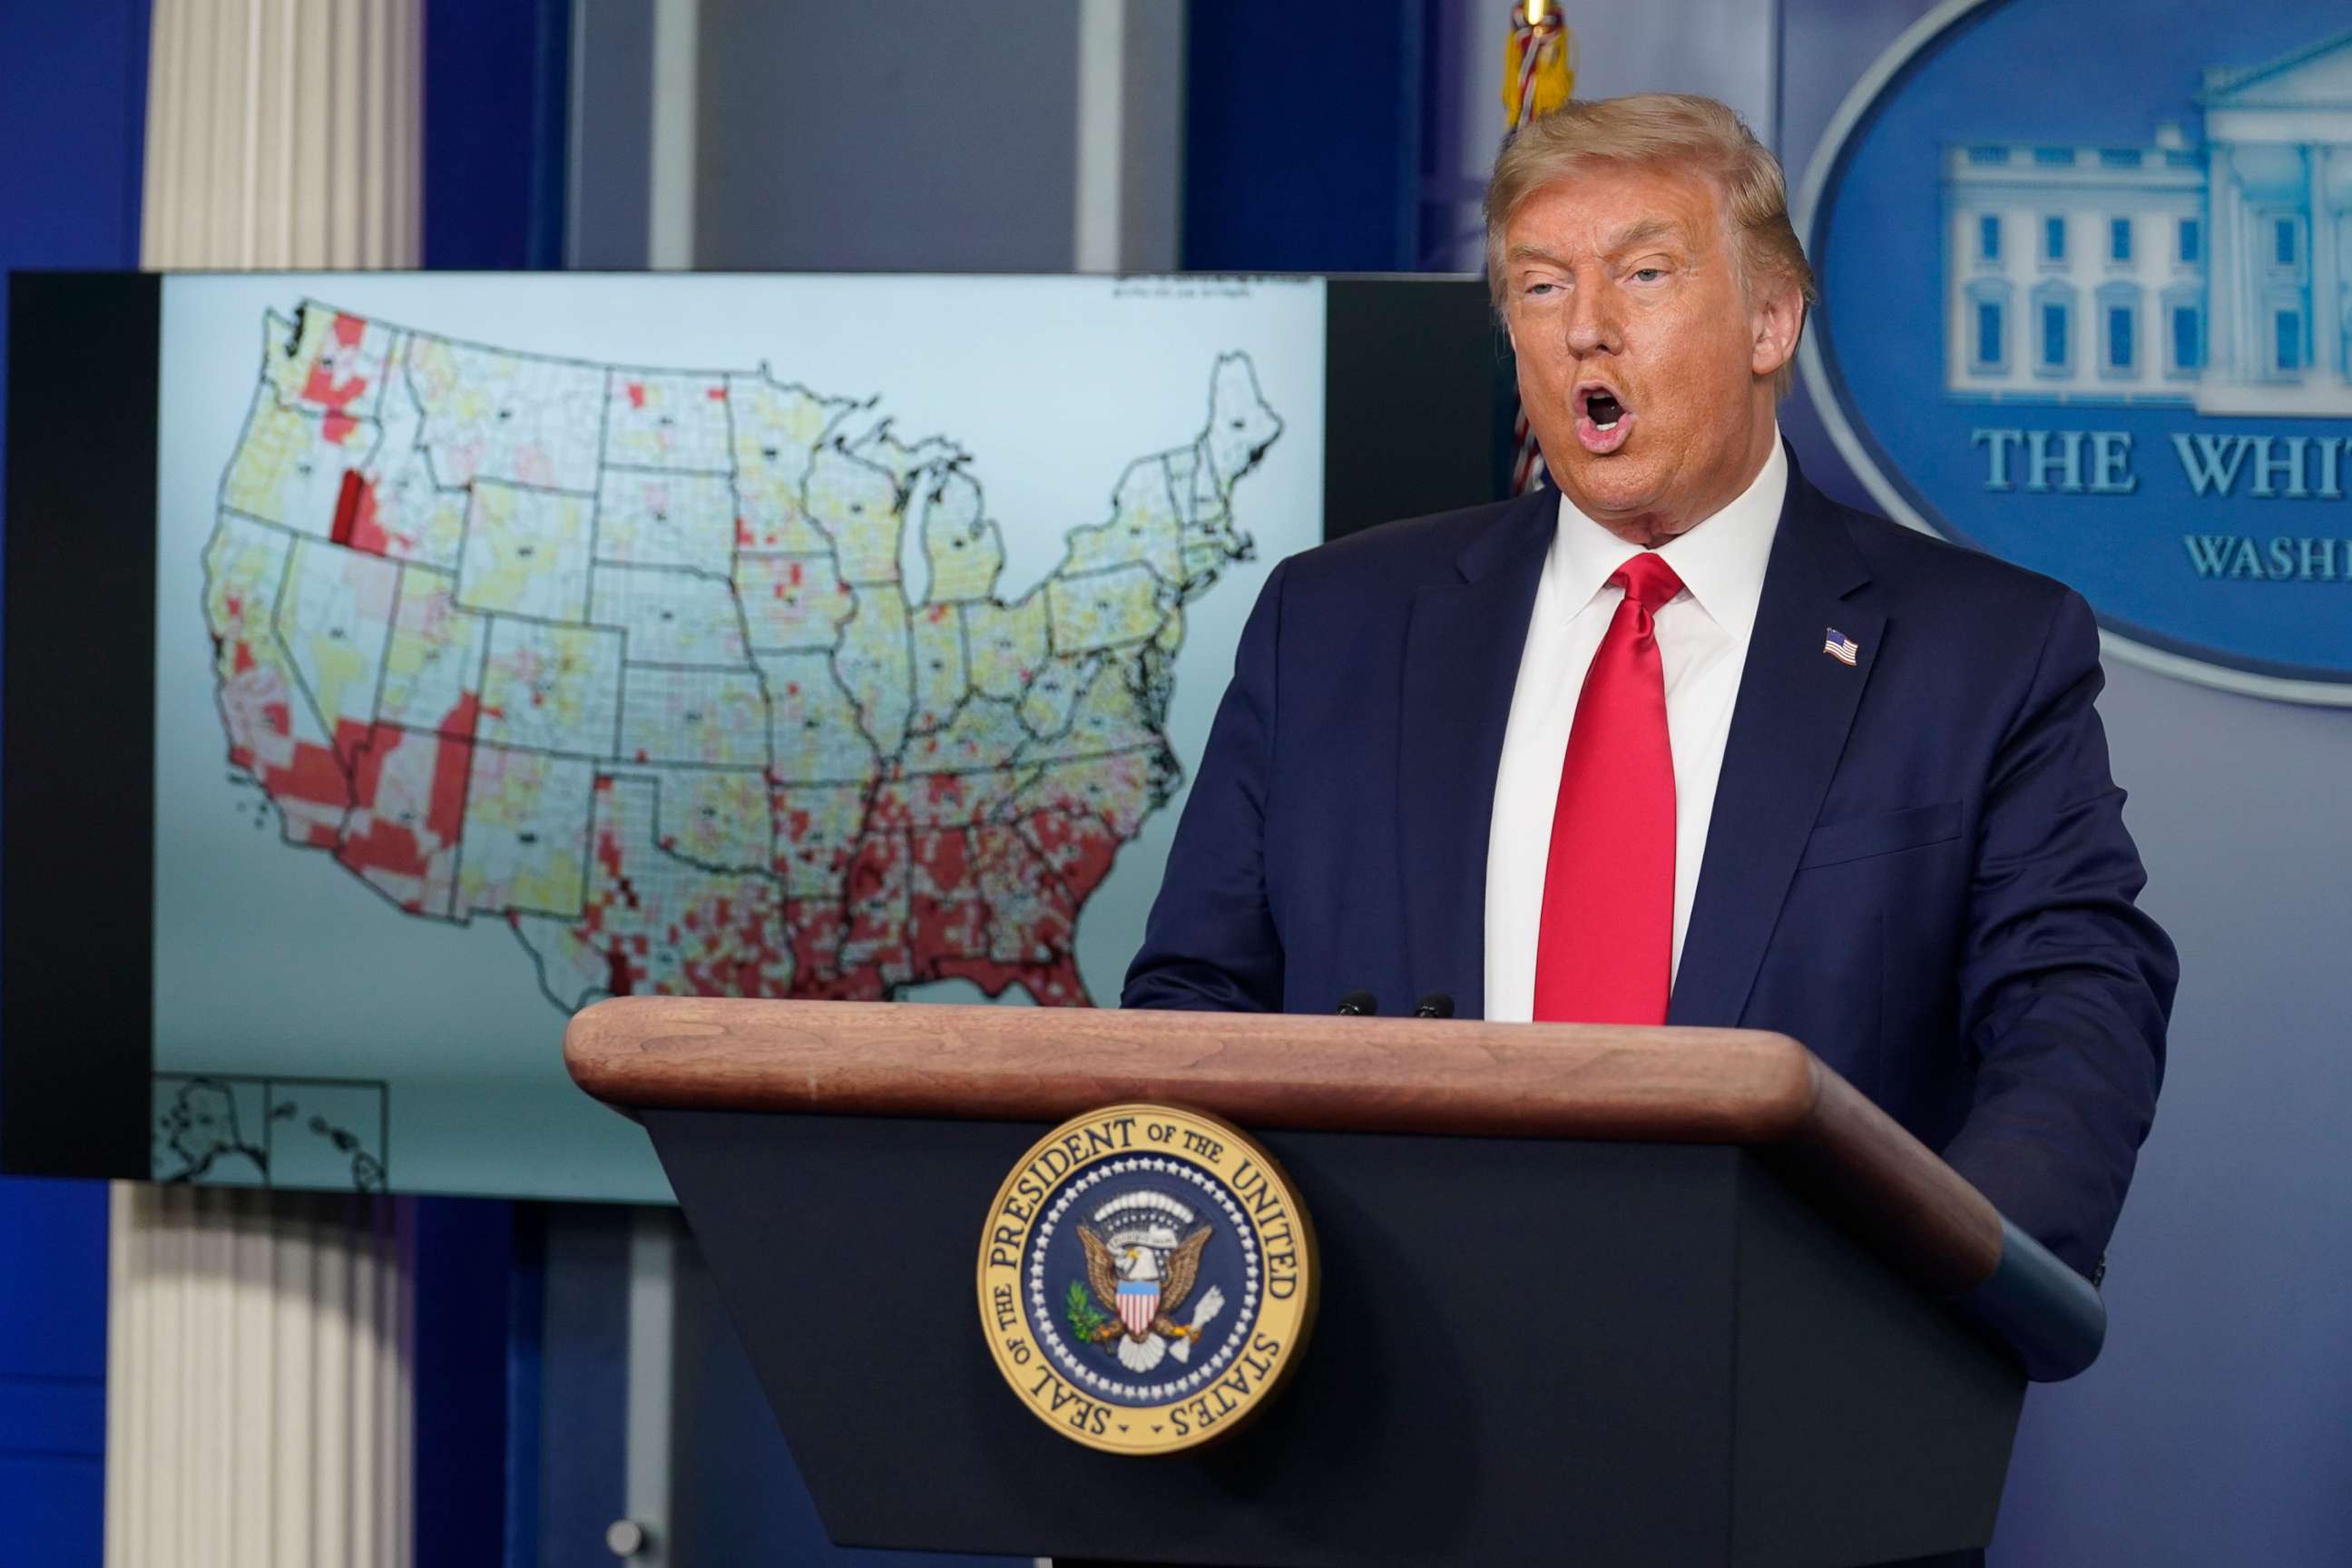 PHOTO: President Donald Trump speaks during a news conference at the White House, July 23, 2020.